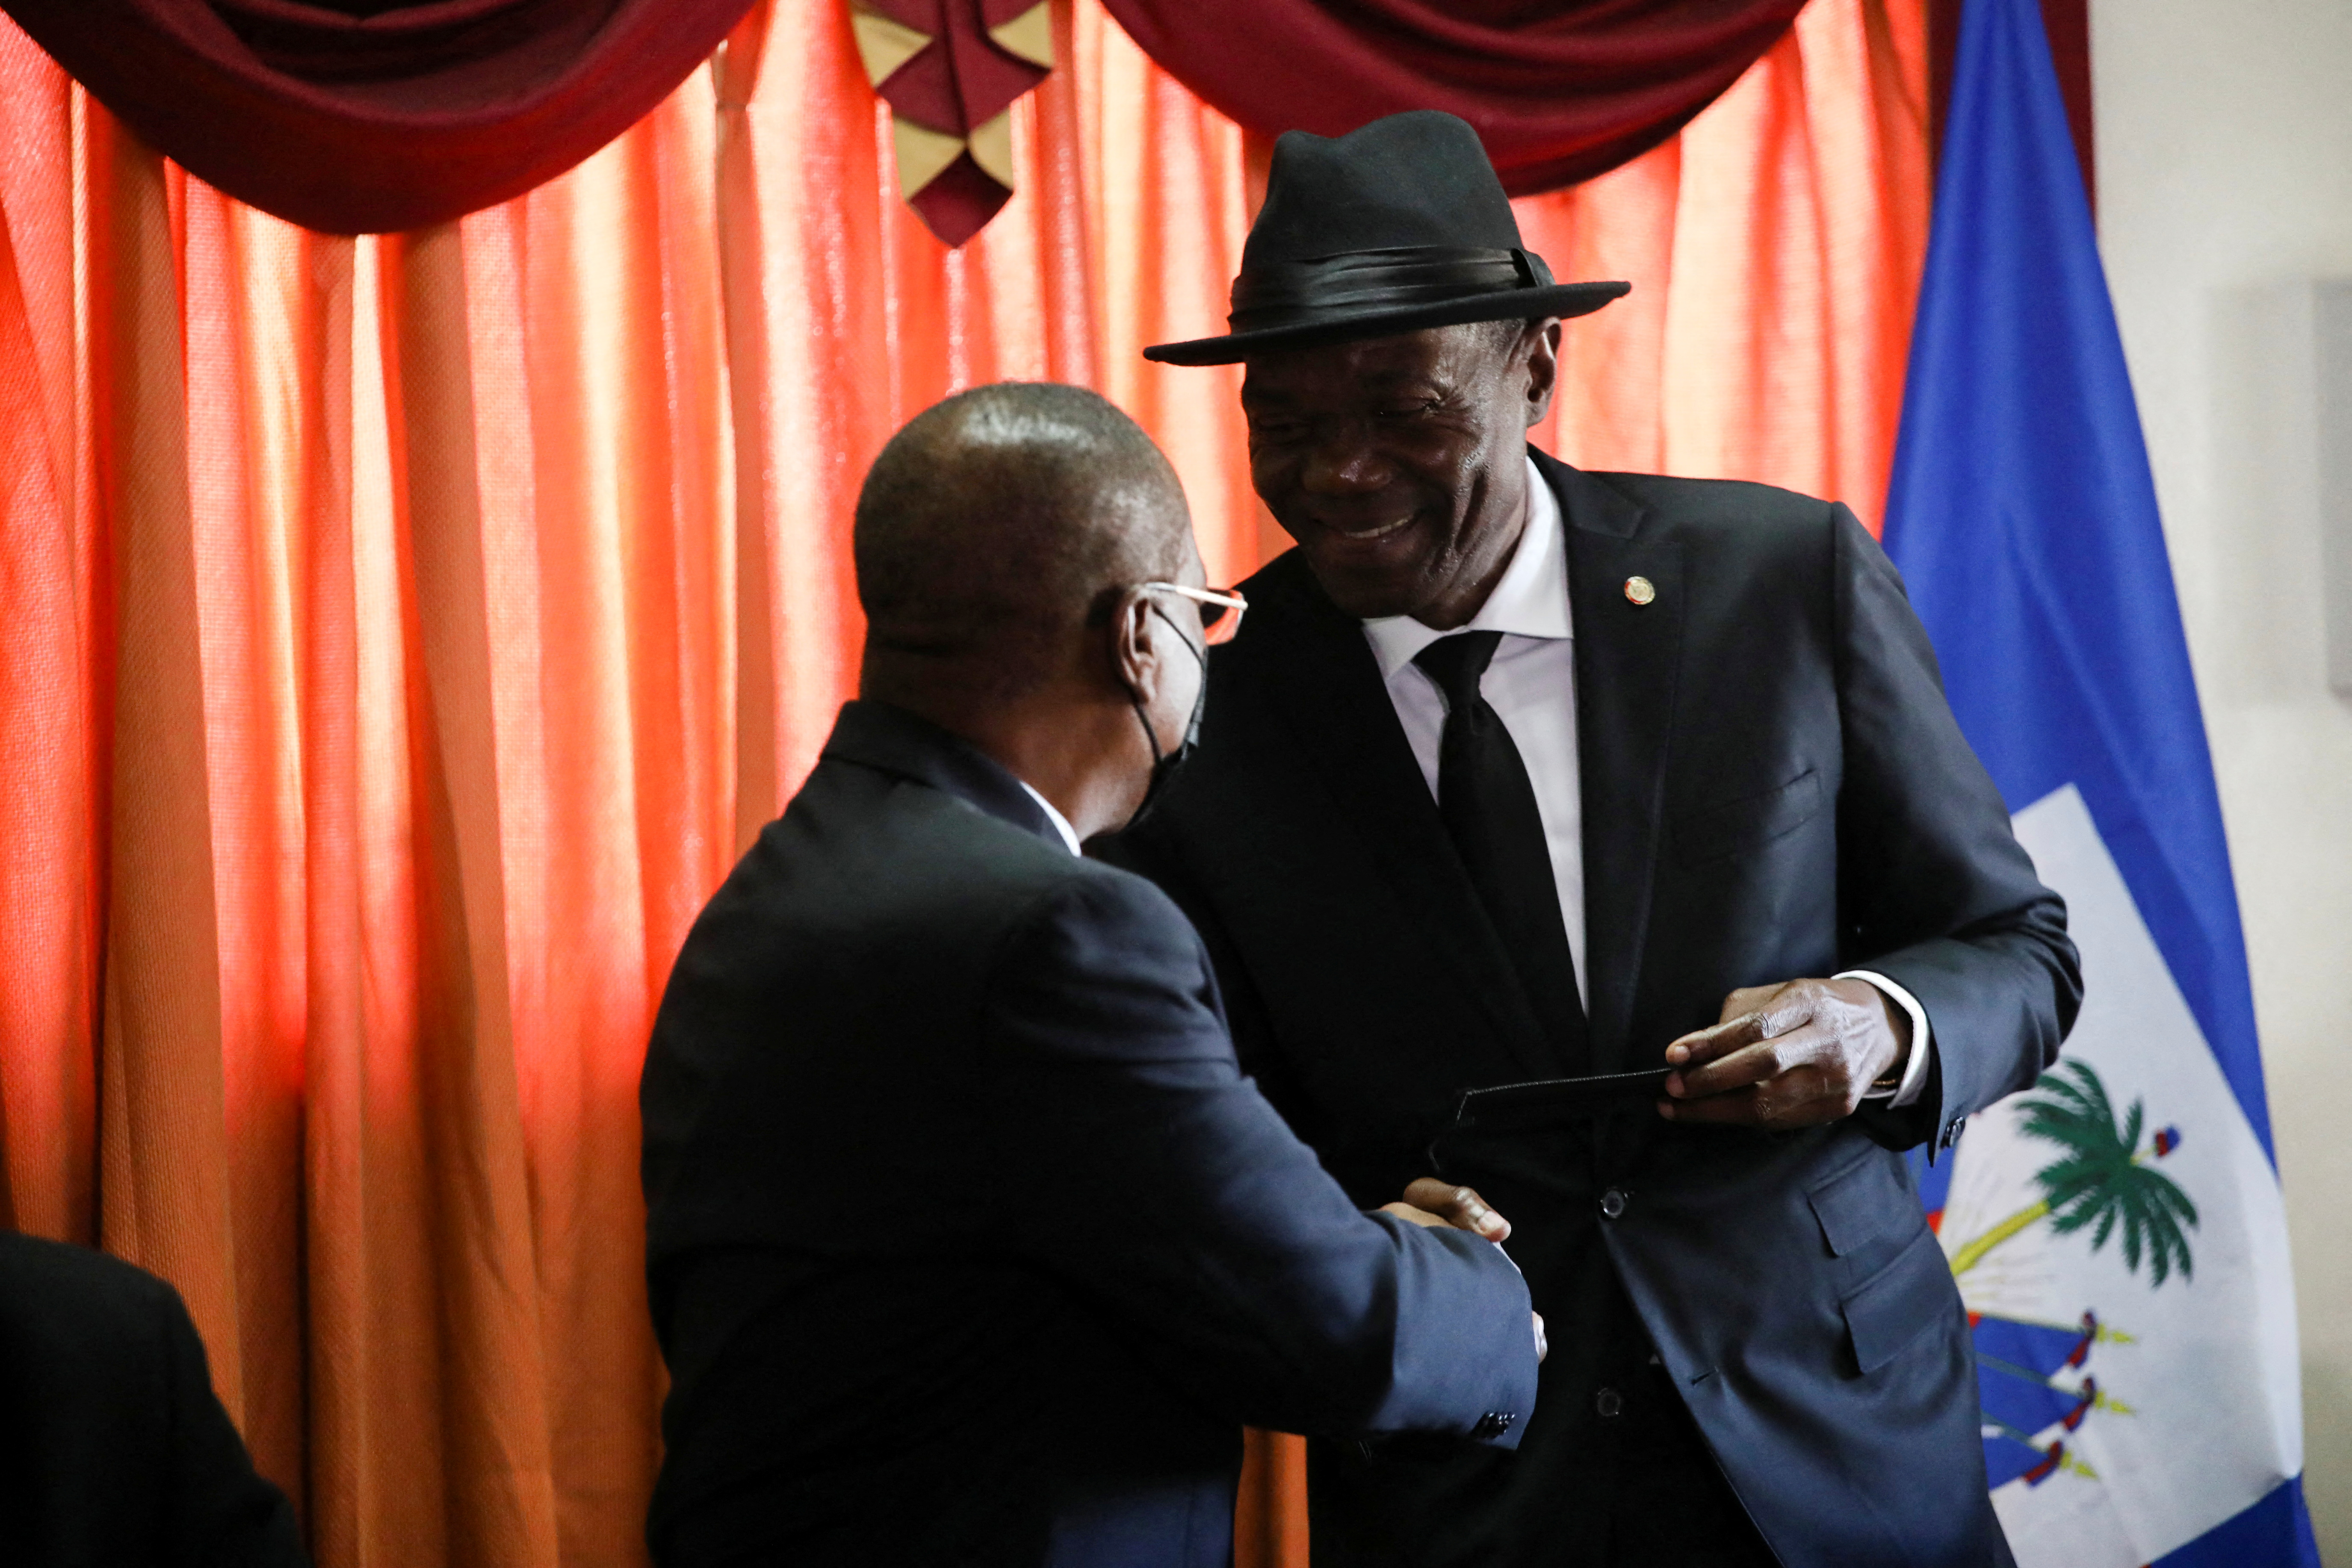 Haiti's outgoing Senate leader Joseph Lambert shakes hands with Senator Pierre Francois Syldor at a news conference where Lambert announced his intention to continue holding sessions as his term expires, in Port-au-Prince, Haiti January 10, 2022. REUTERS/Ralph Tedy Erol